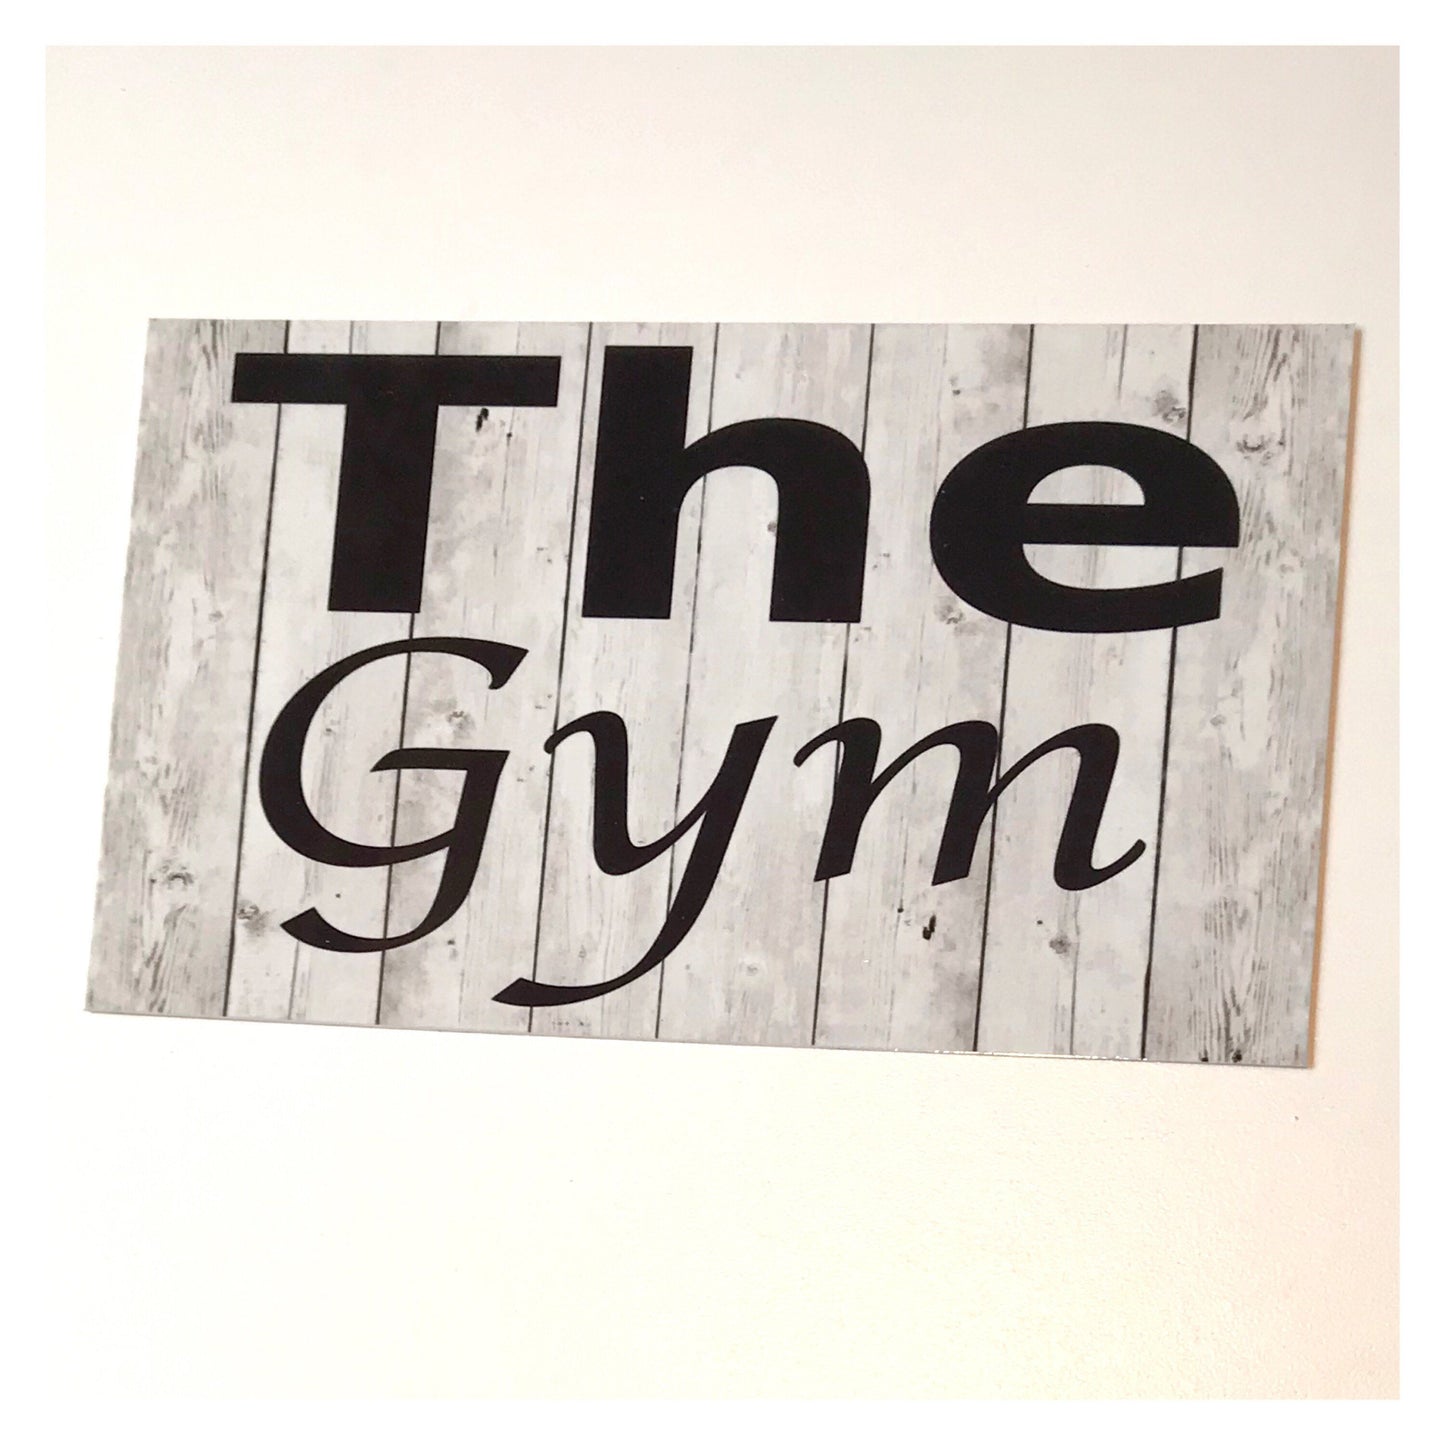 The Gym Door or Room Sign Wall Plaque or Hanging Fitness Health Business Home